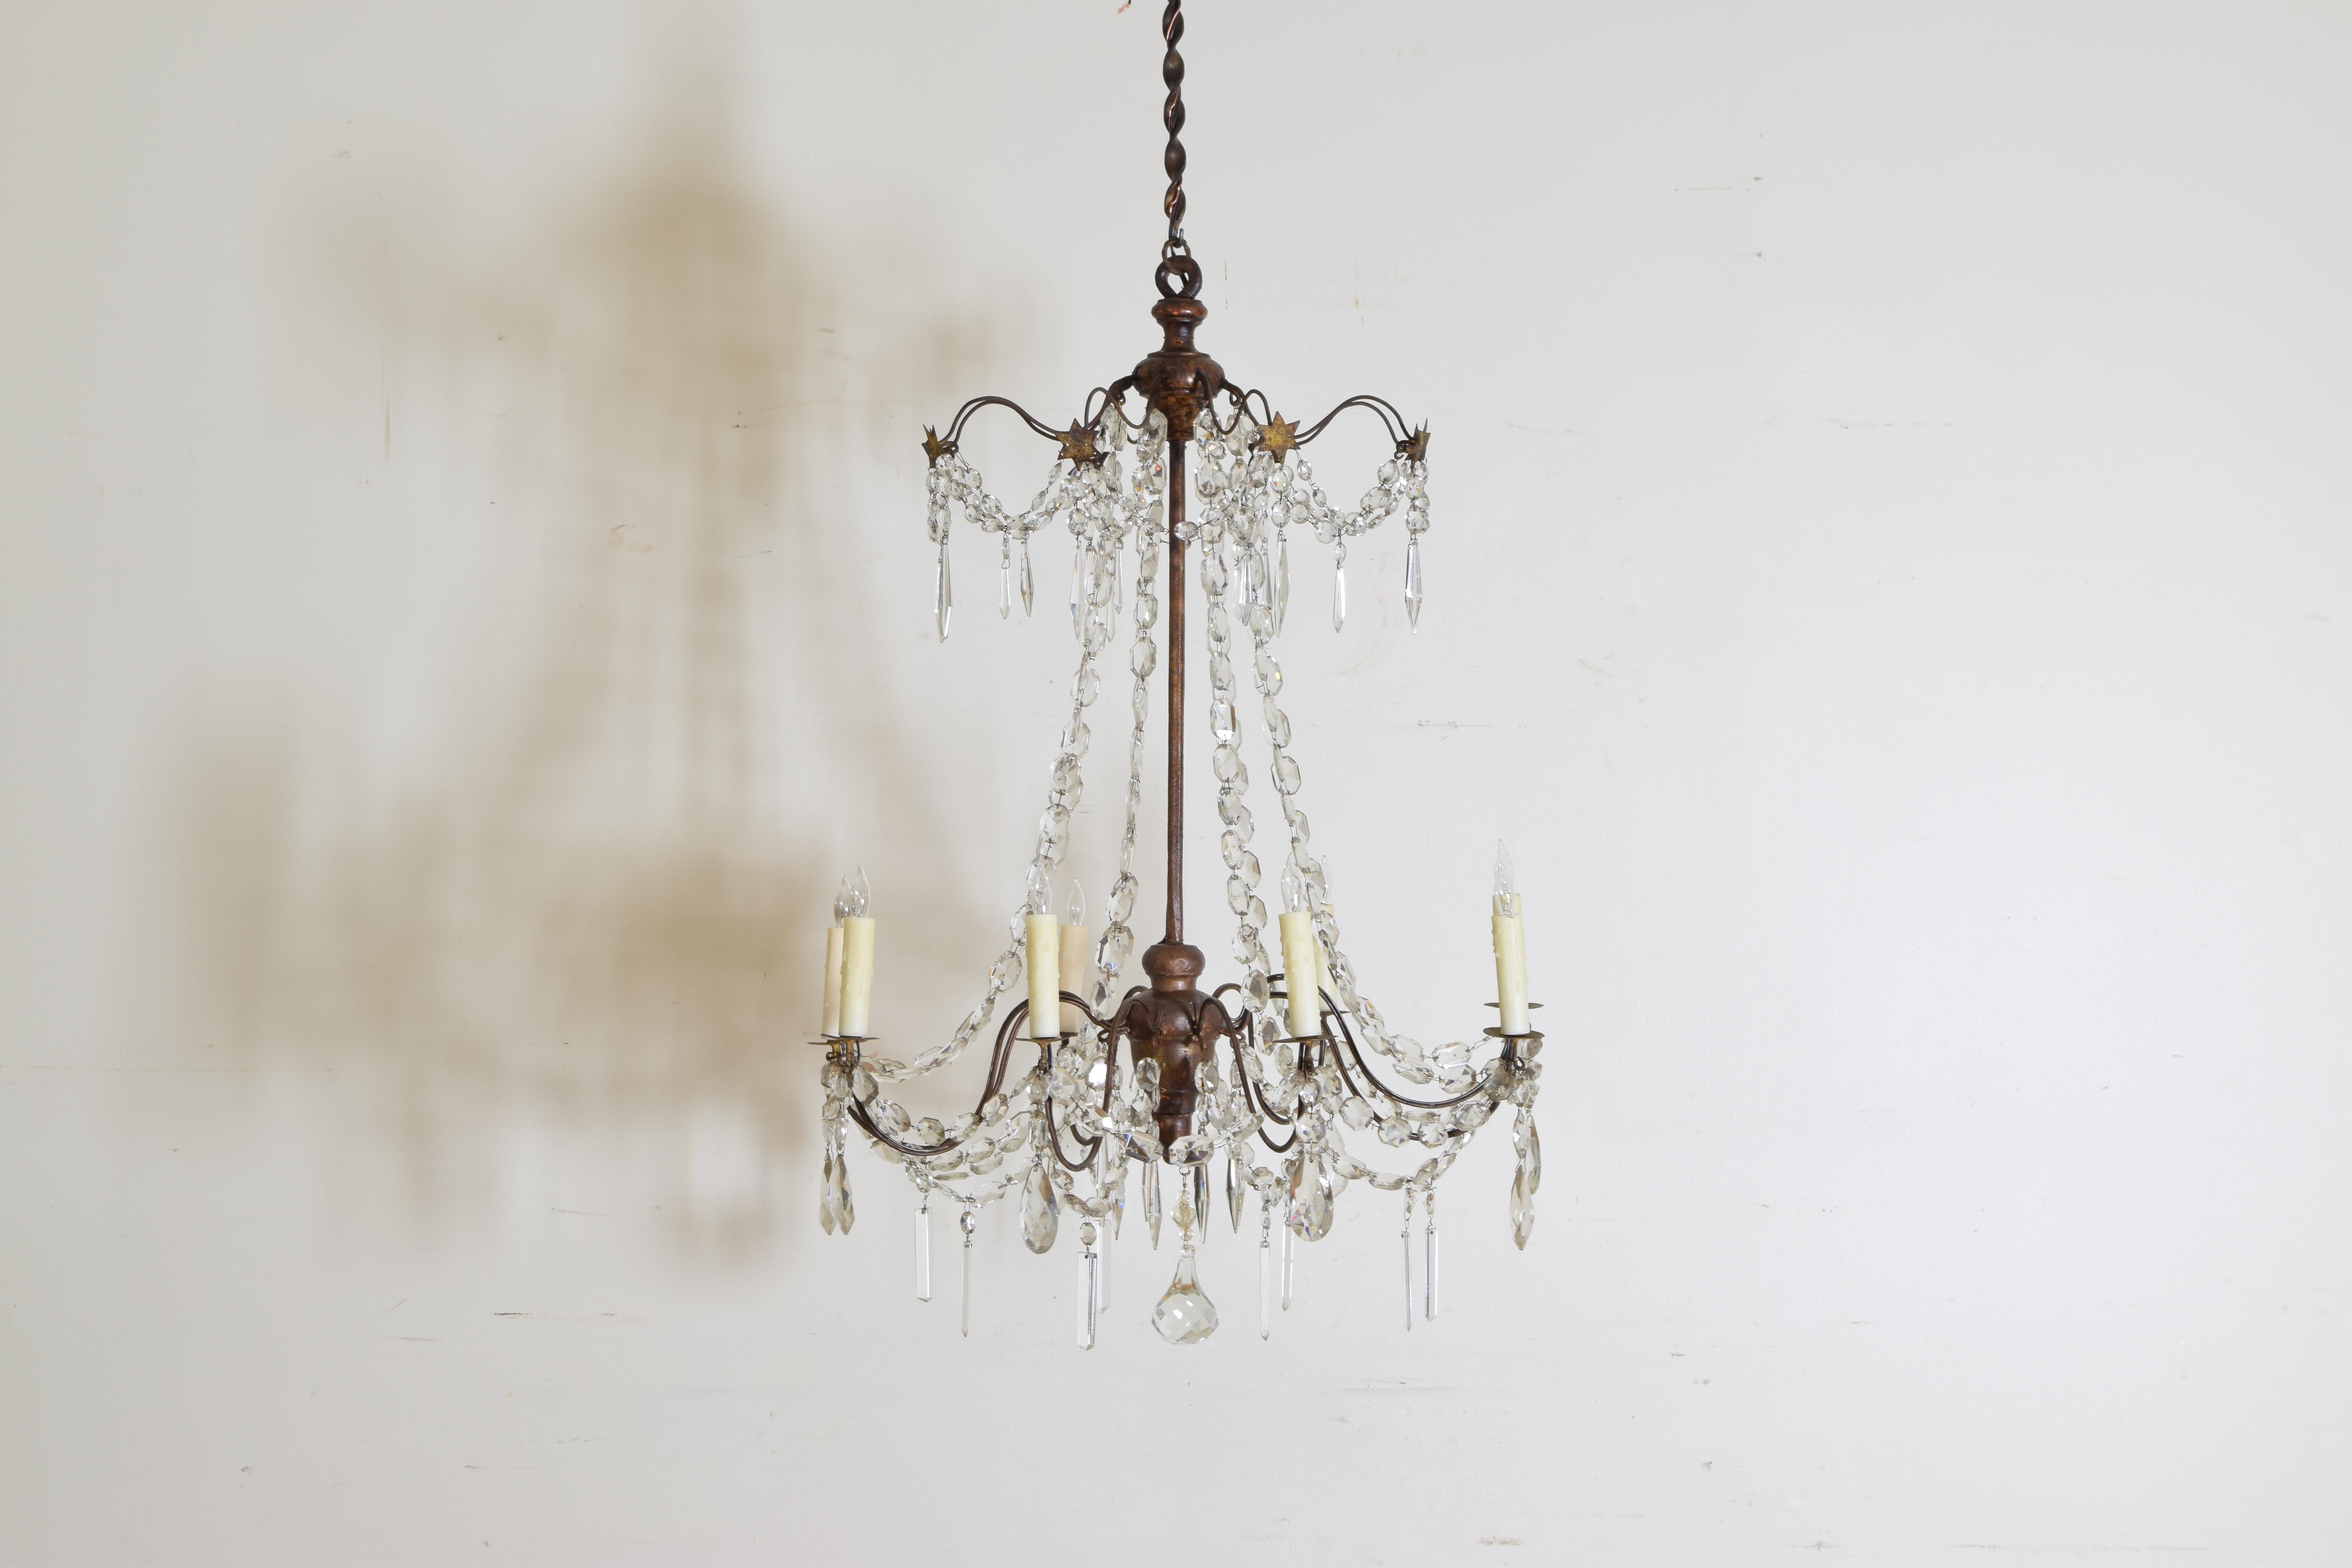 This chandelier is based upon a central wrought iron rod with turned a turned giltwood top and bottom, the top portion with gilt metal stars, both issuing thin iron arms with metal bobeches, the arms joined by glass prism chains, now wired